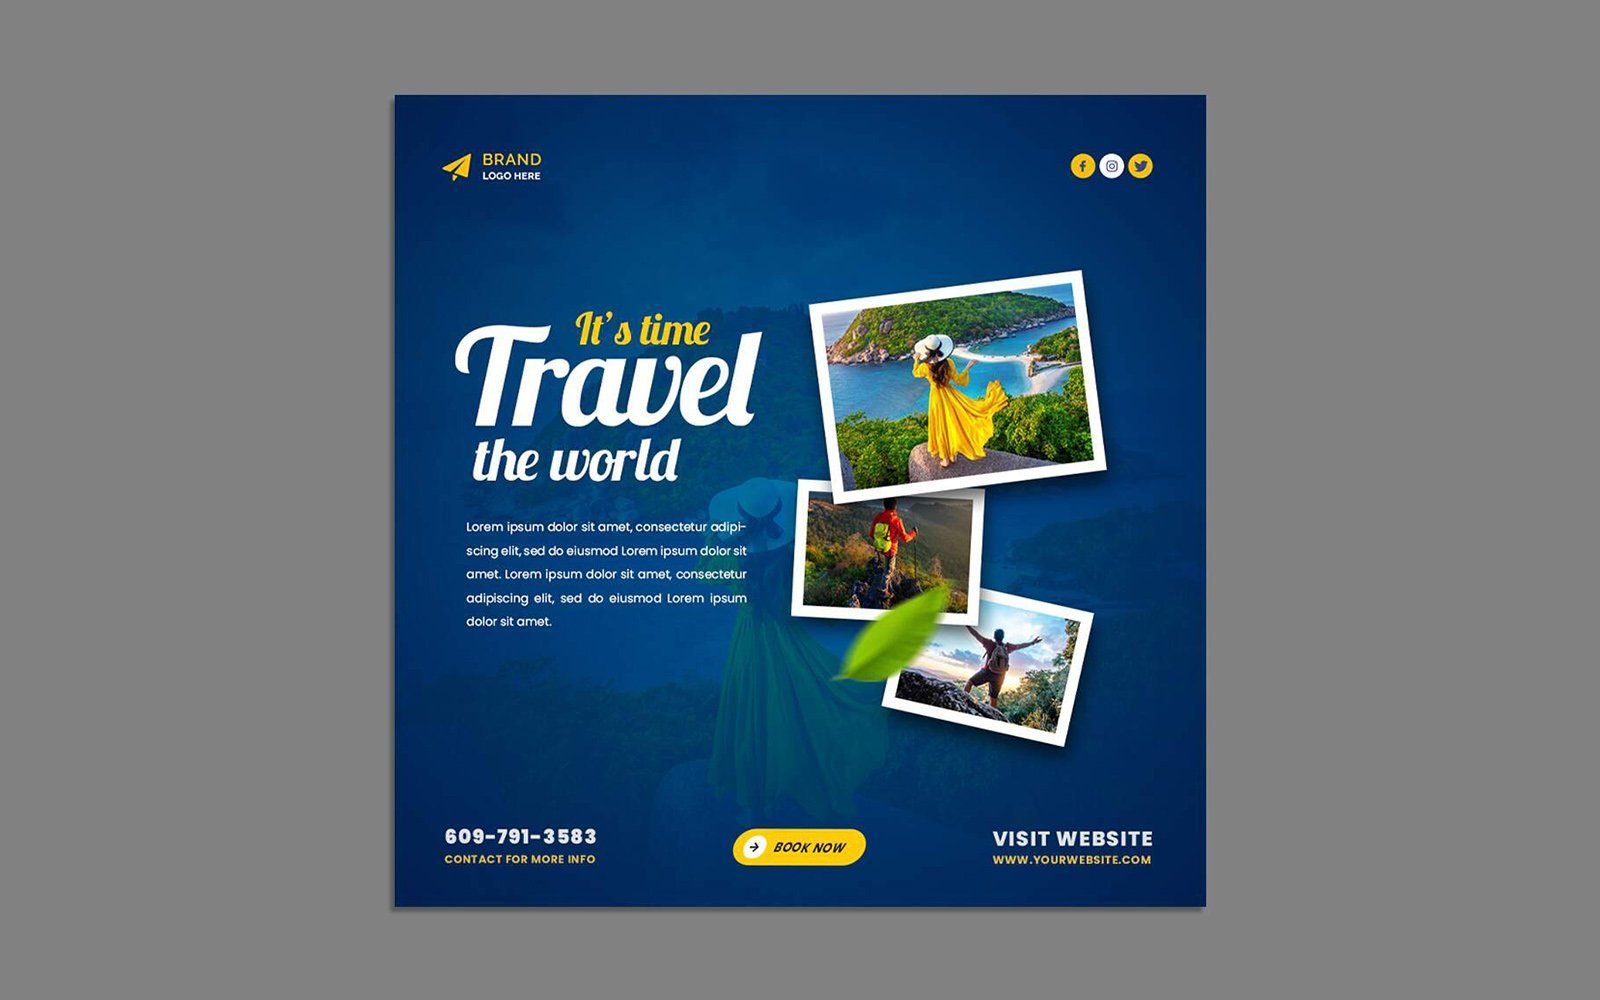 Template #352416 Tourism Vacation Webdesign Template - Logo template Preview